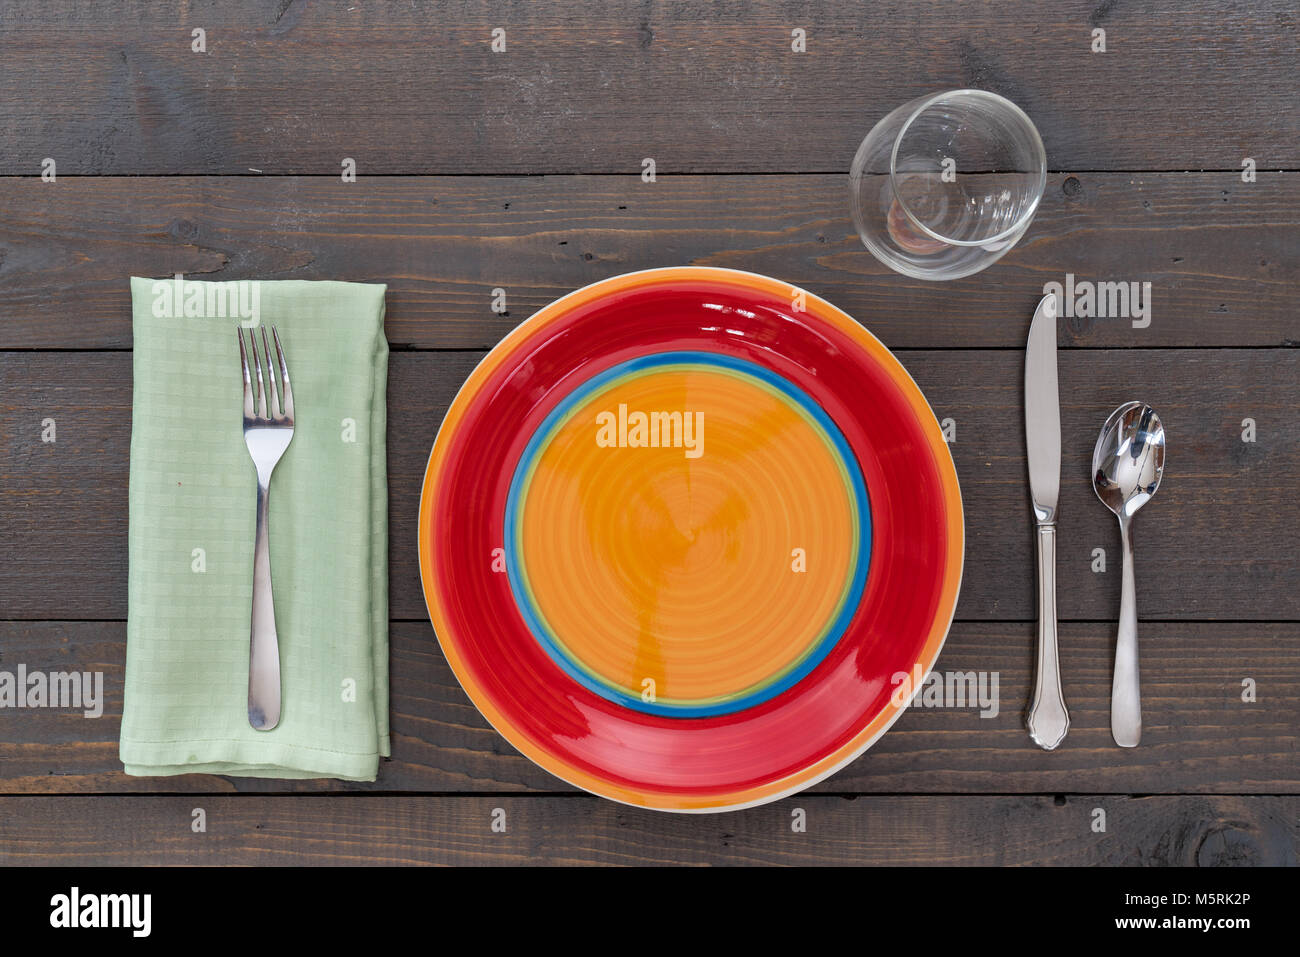 Dining place setting on a rustic wood background Stock Photo